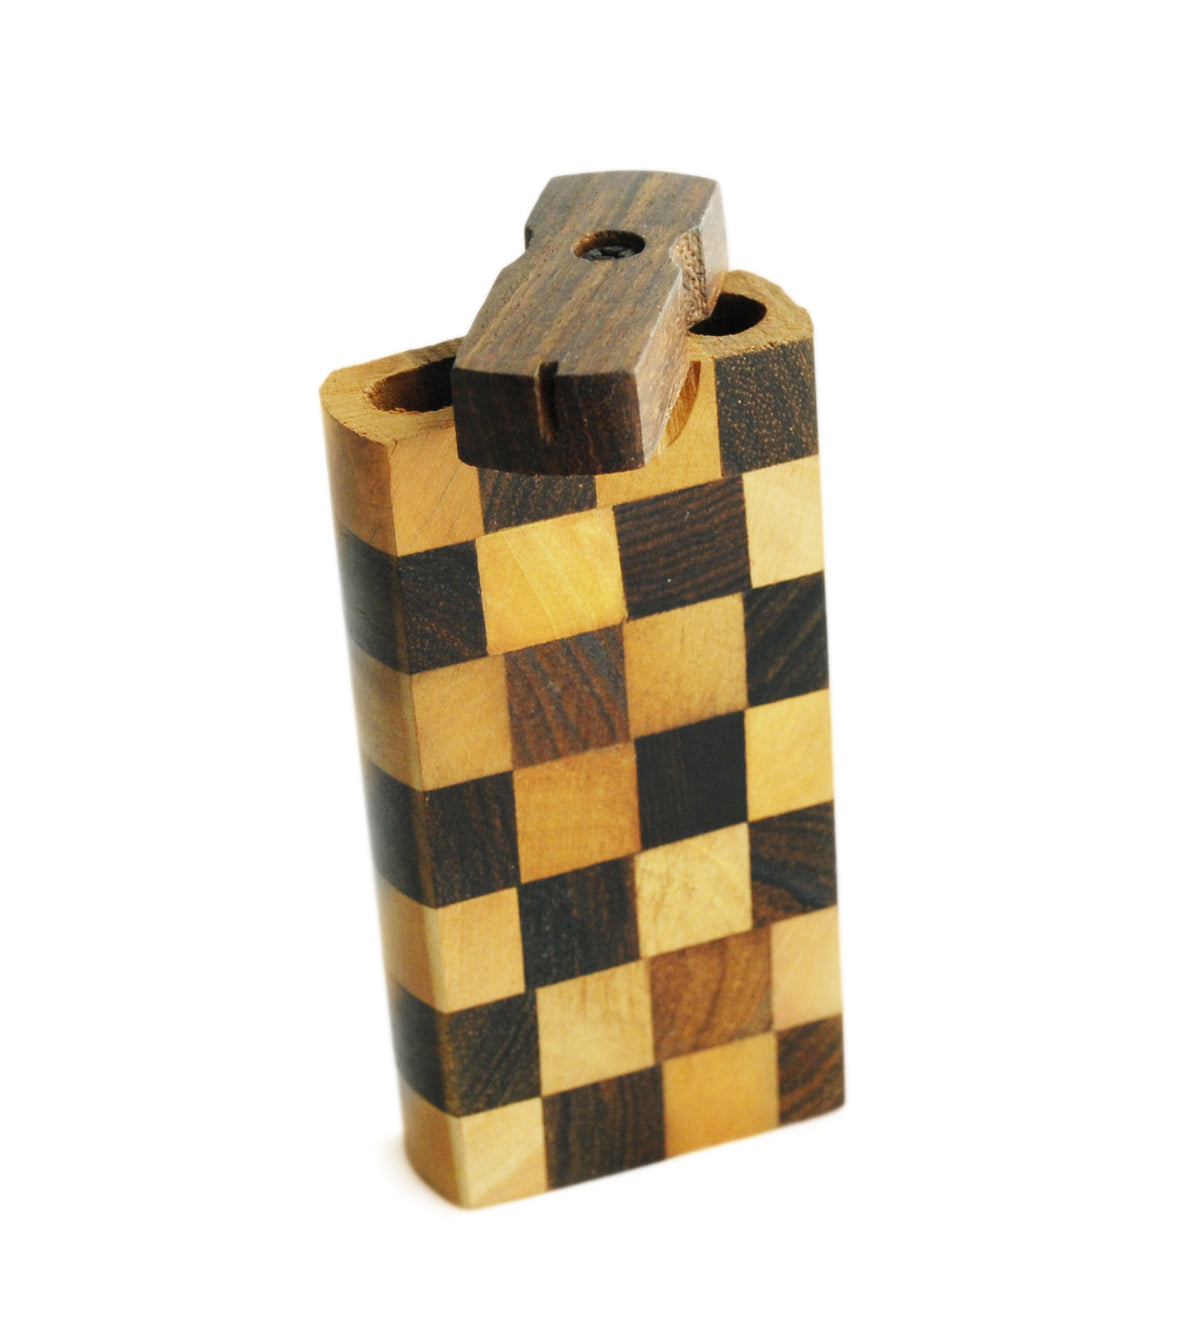 Dugout small Squares stripped wood made by hand,